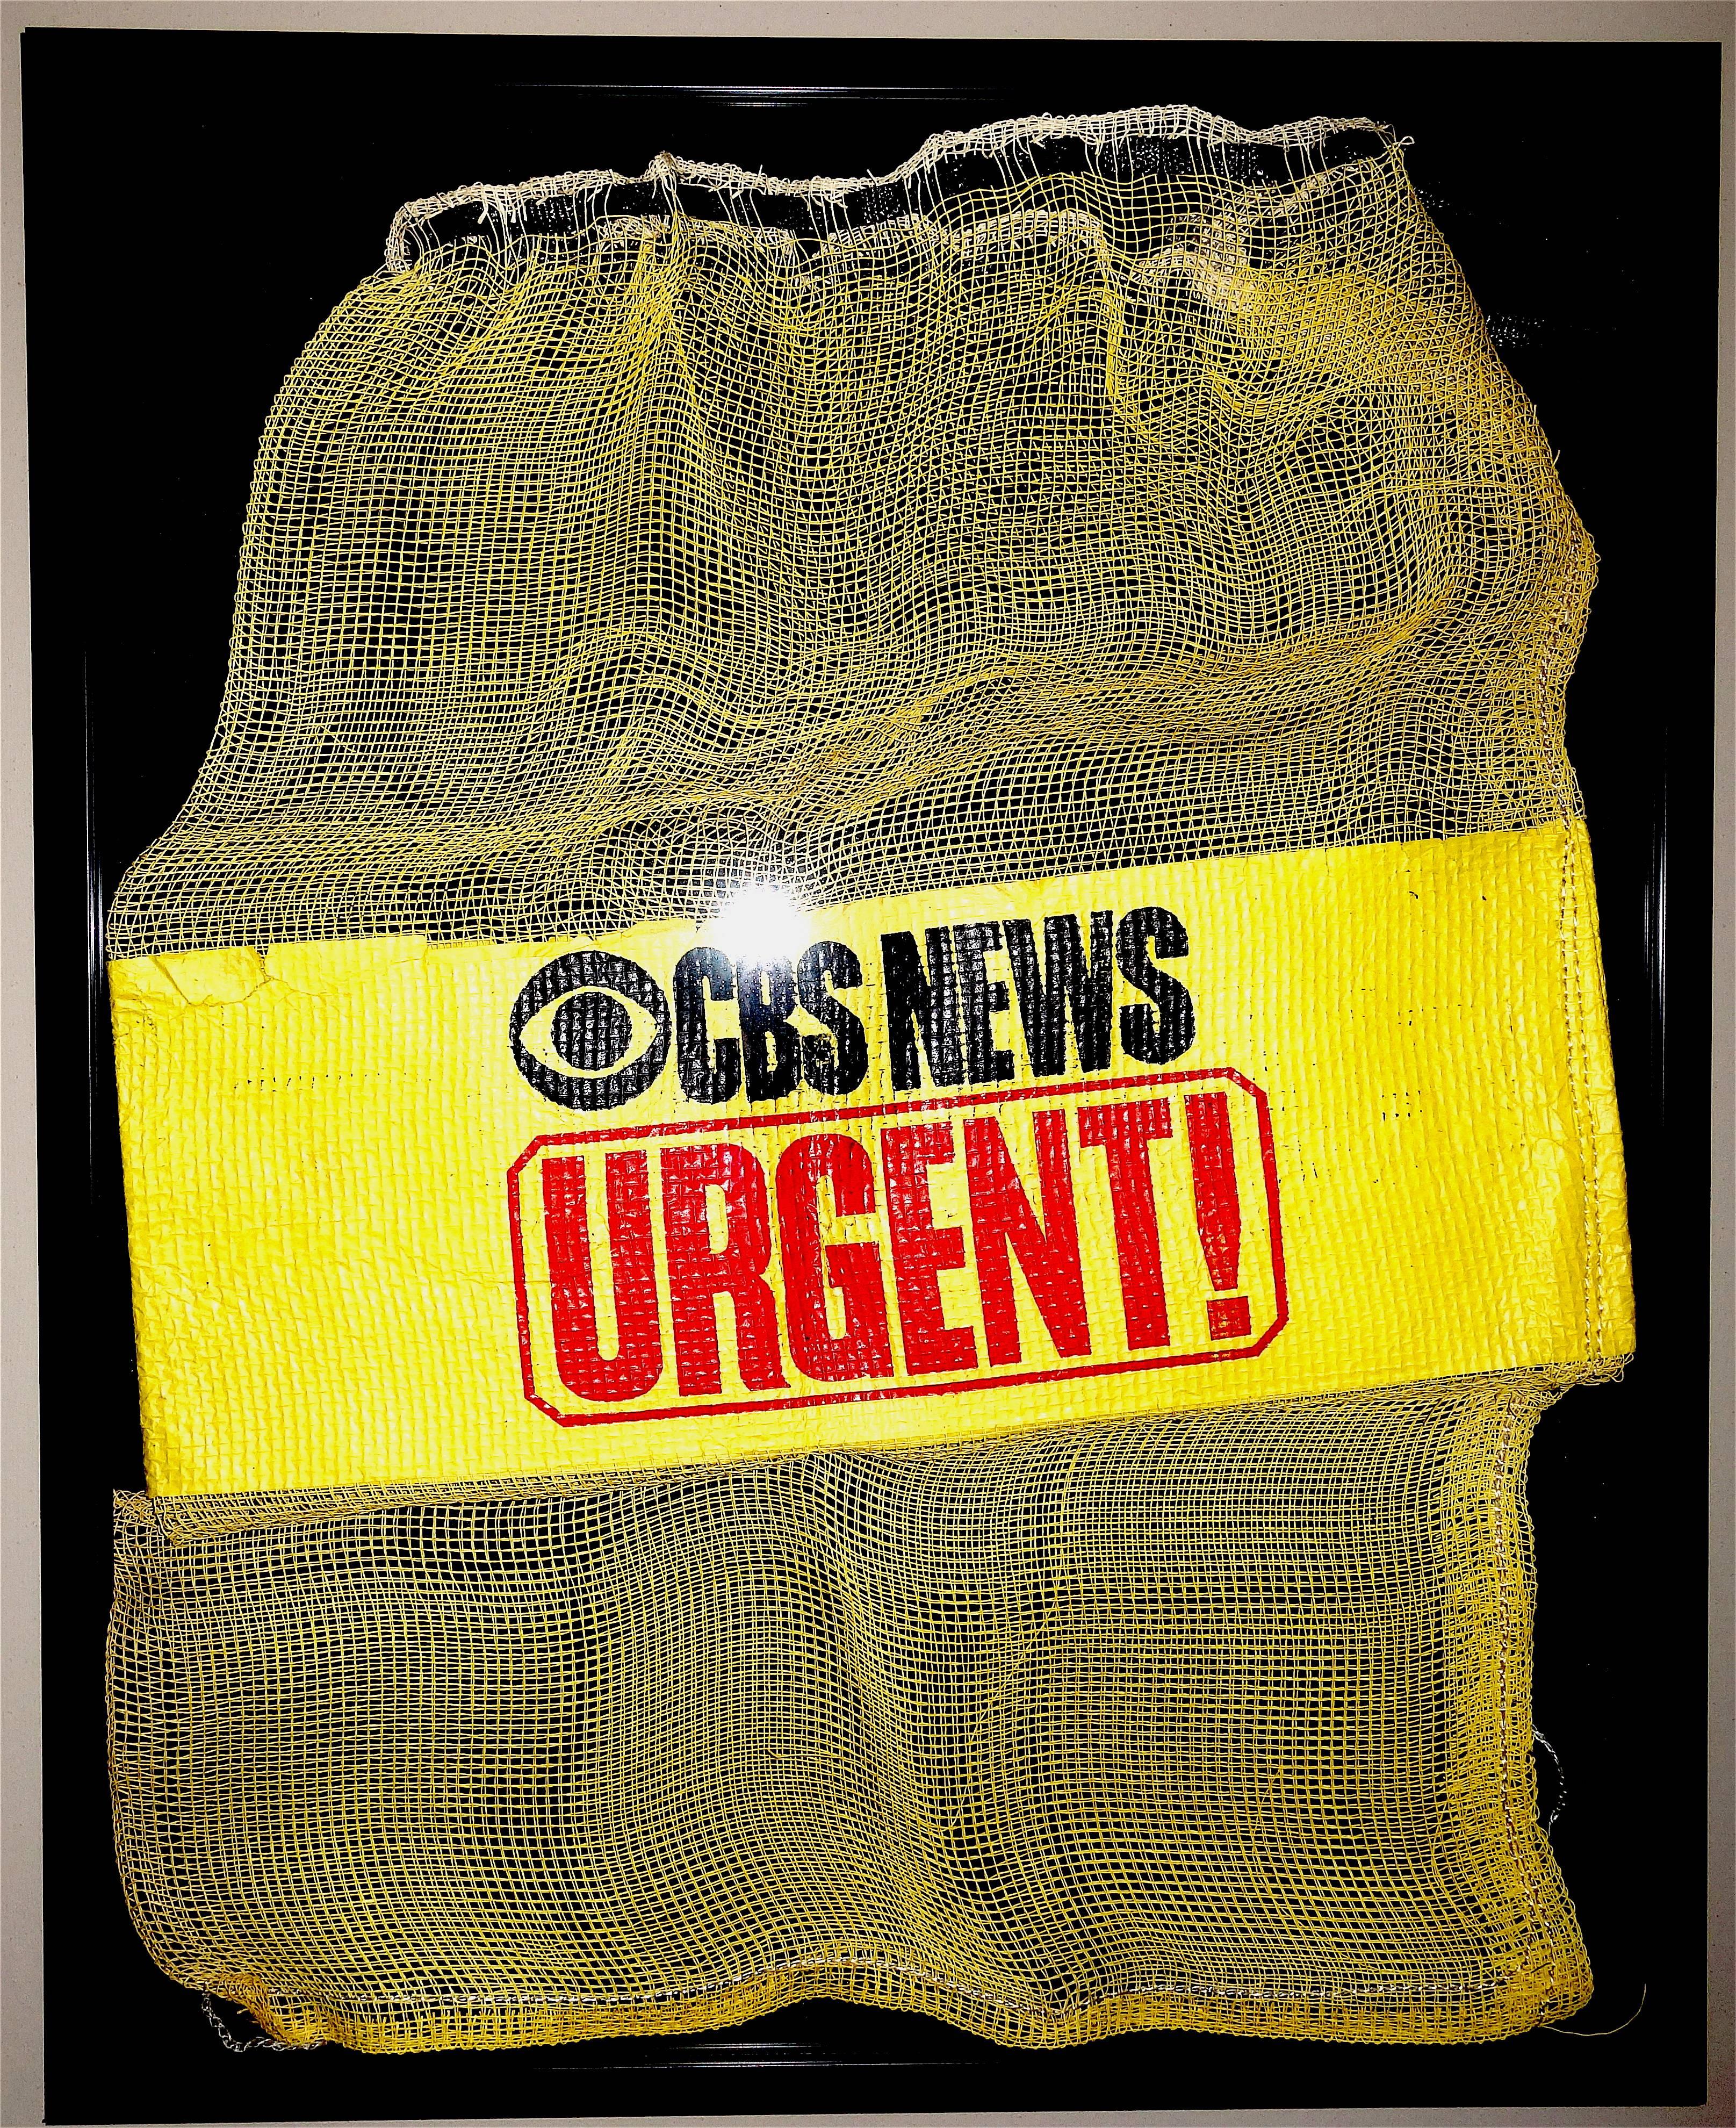 Submitted for your consideration is this Circa mid 20th century CBS News artifact.
We had only two of these rare pieces and one has just sold to a CBS executive. The one offered here, is now the last remaining piece like this anywhere.

These